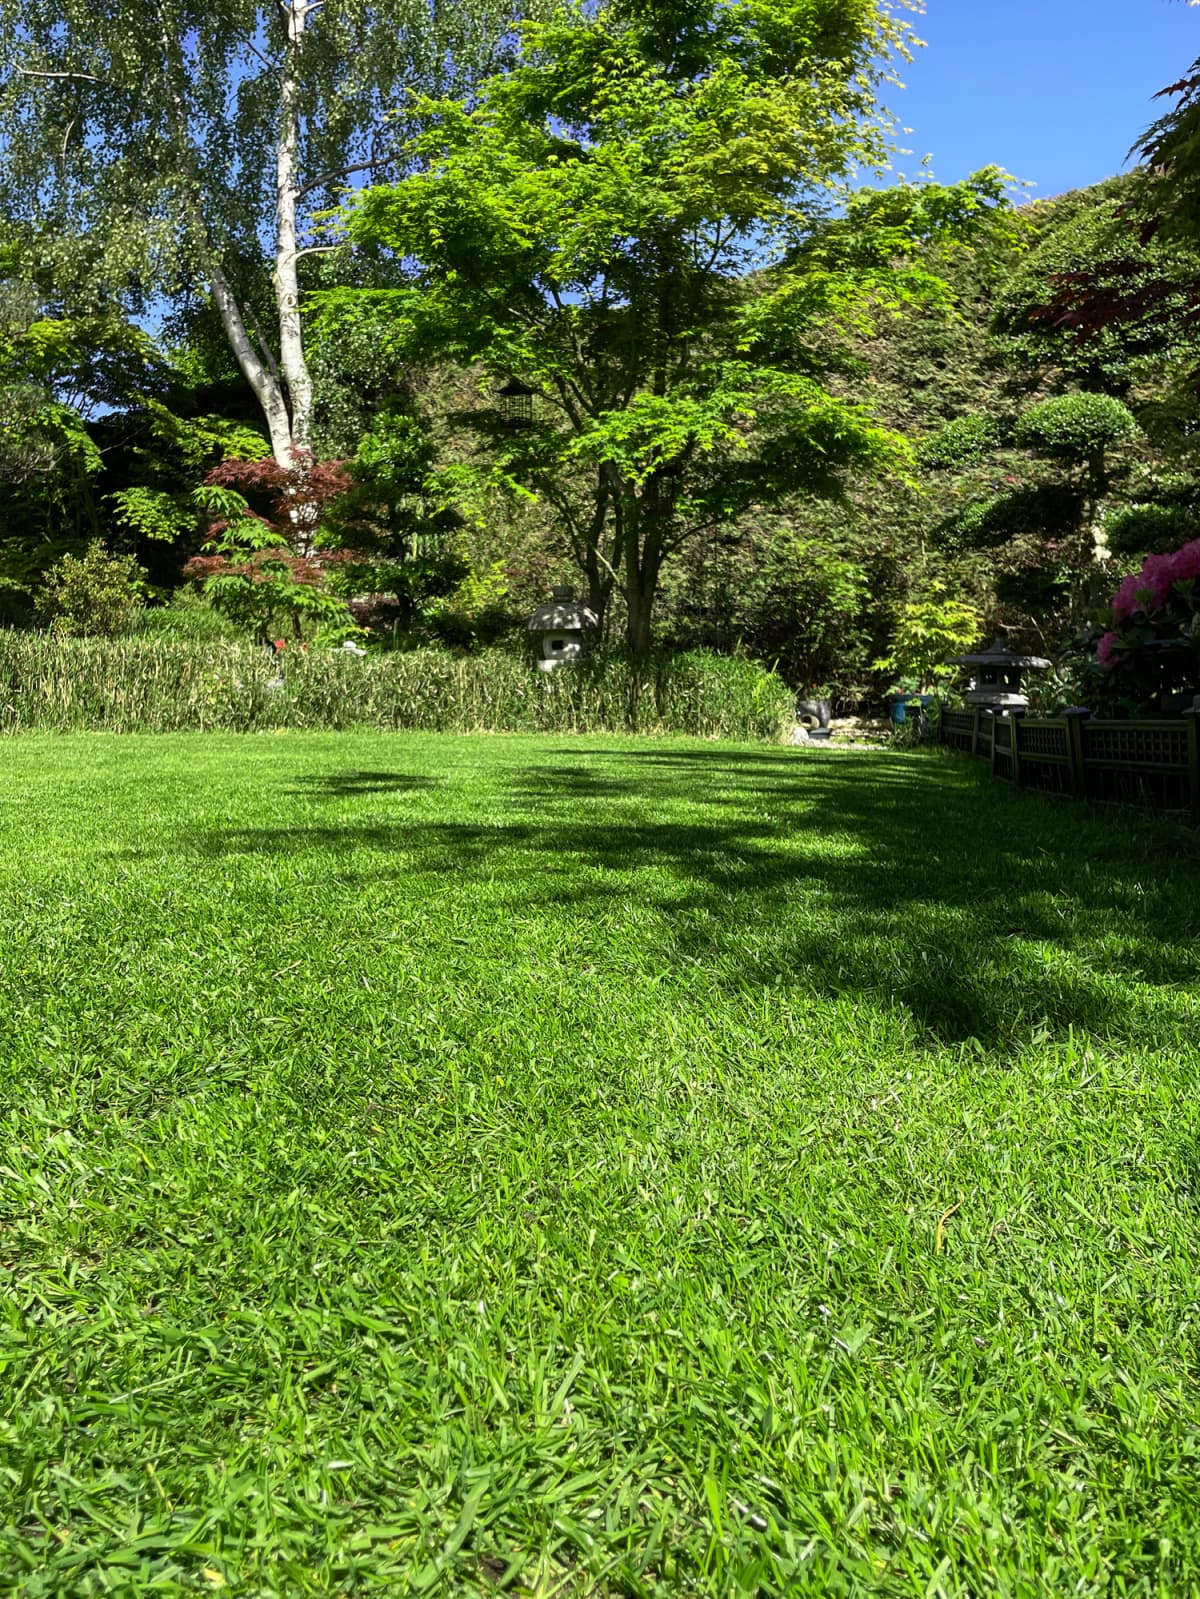 Stock photo showing close-up view of reseeded lawn rejuvenation after being sown with grass seed as part of Spring lawn maintenance. Oriental garden border with flowering azalea shrubs, Japanese maples and a Japanese stone lantern.